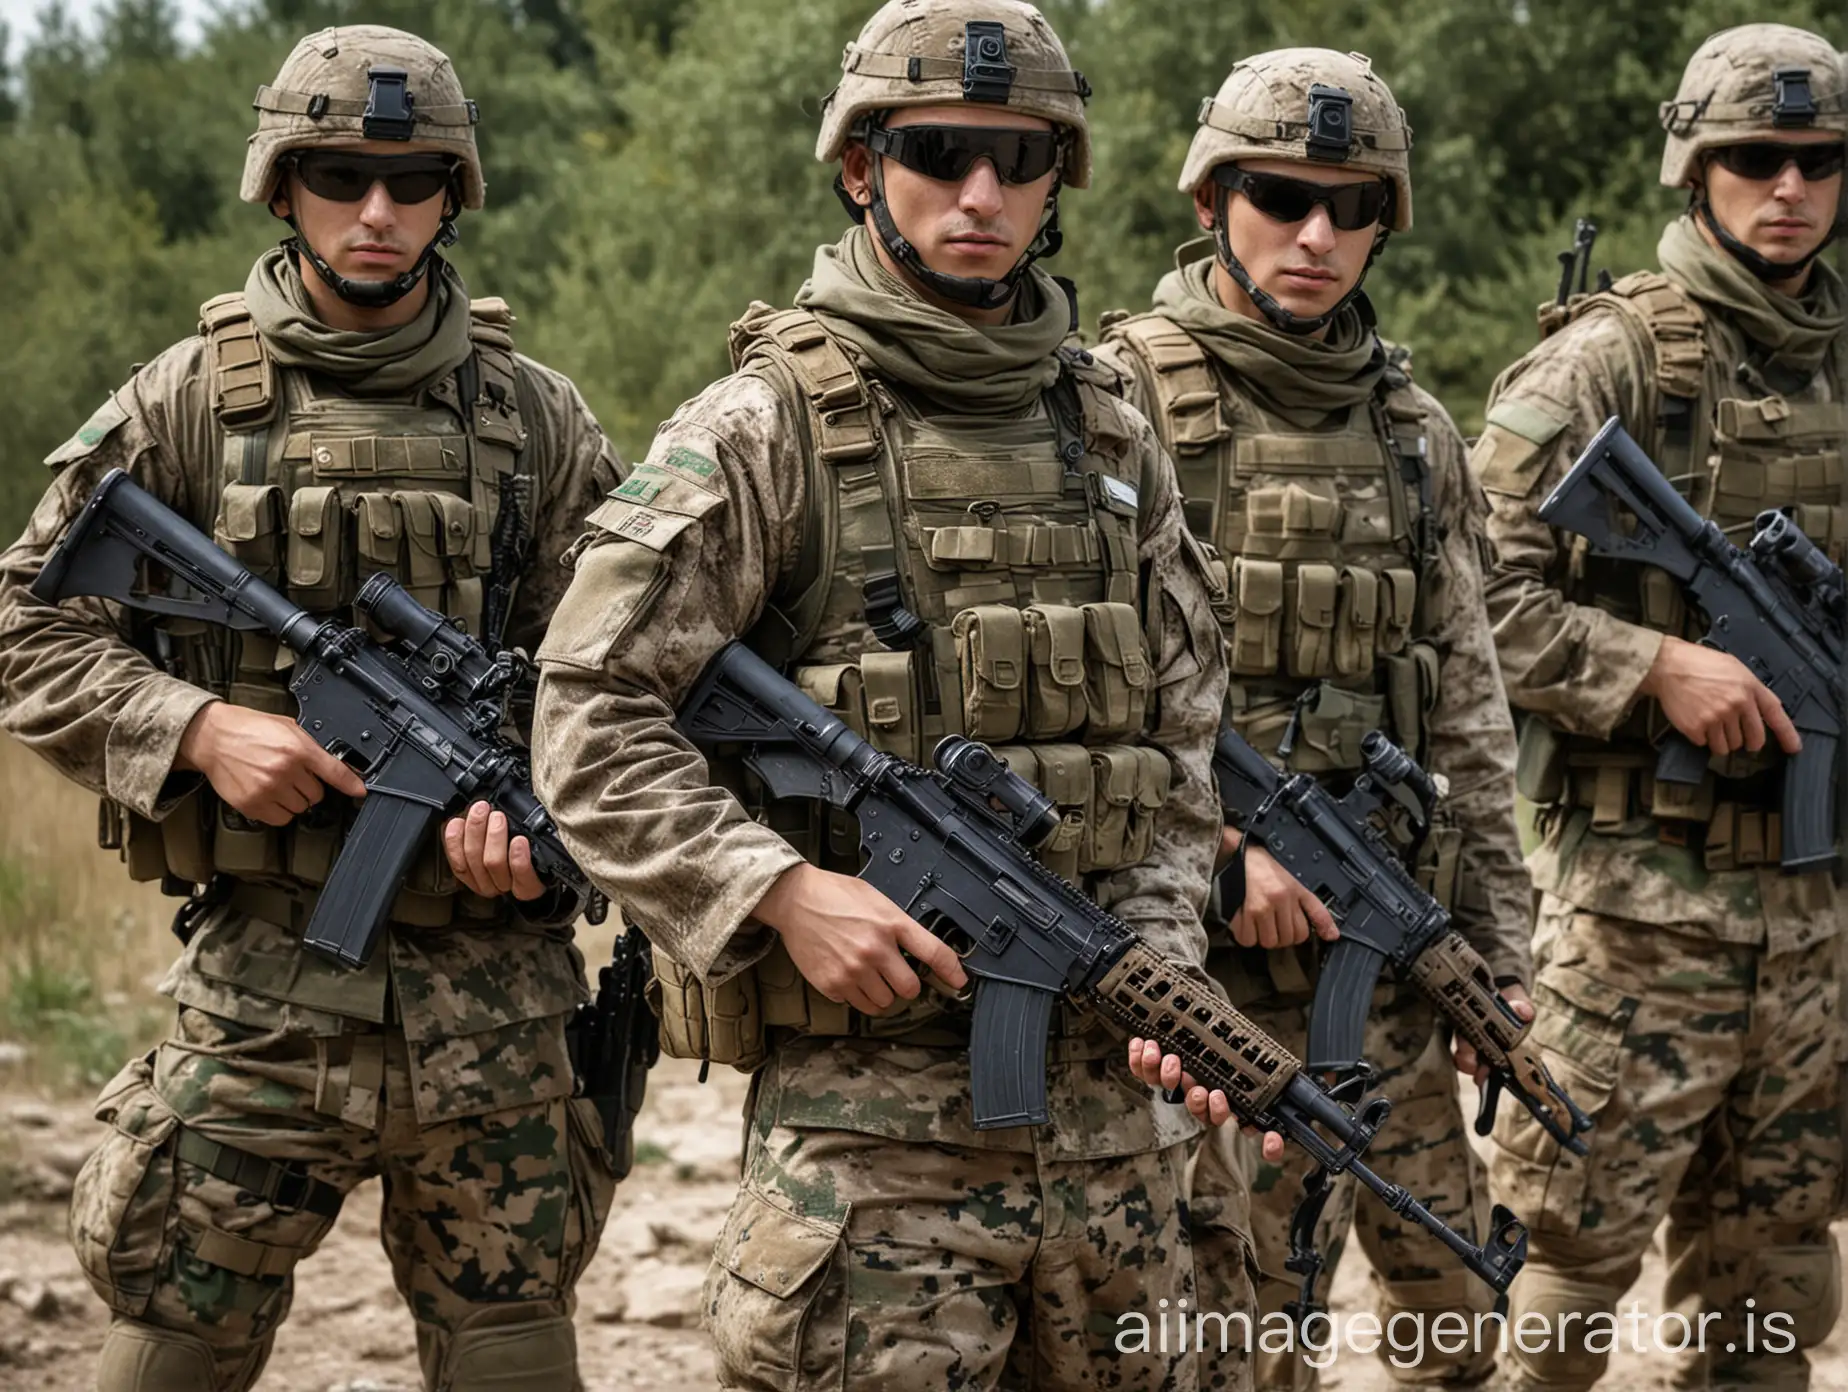 21 century bulgarian soldiers in modern combat gear and digital camouflage with their ak-47 weapons and tactical glasses